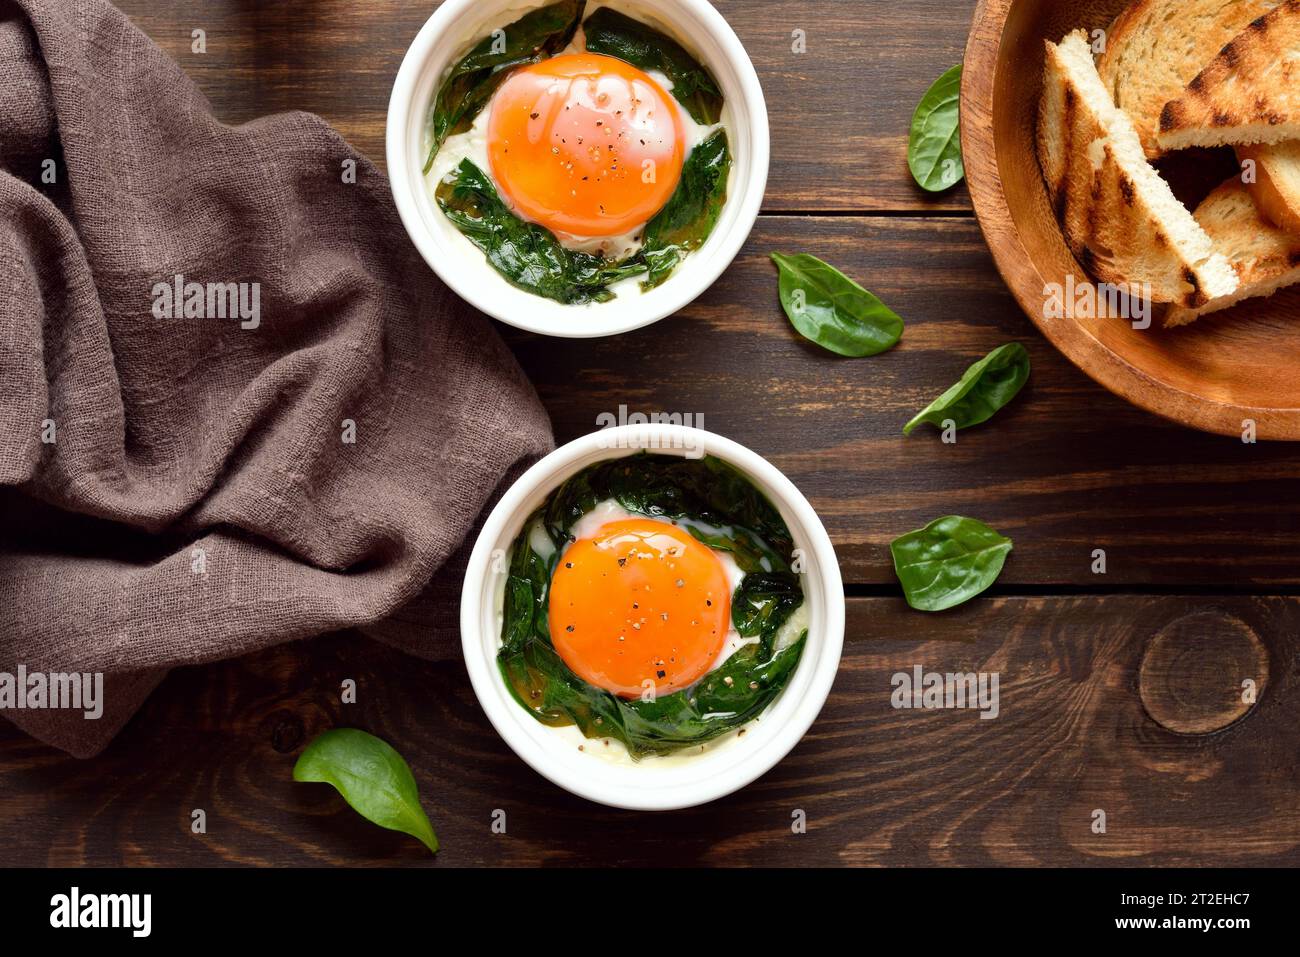 Eggs en cocotte (baked eggs) in ramekins with cream, сheese and spinach on wooden background. Top view, flat lay Stock Photo